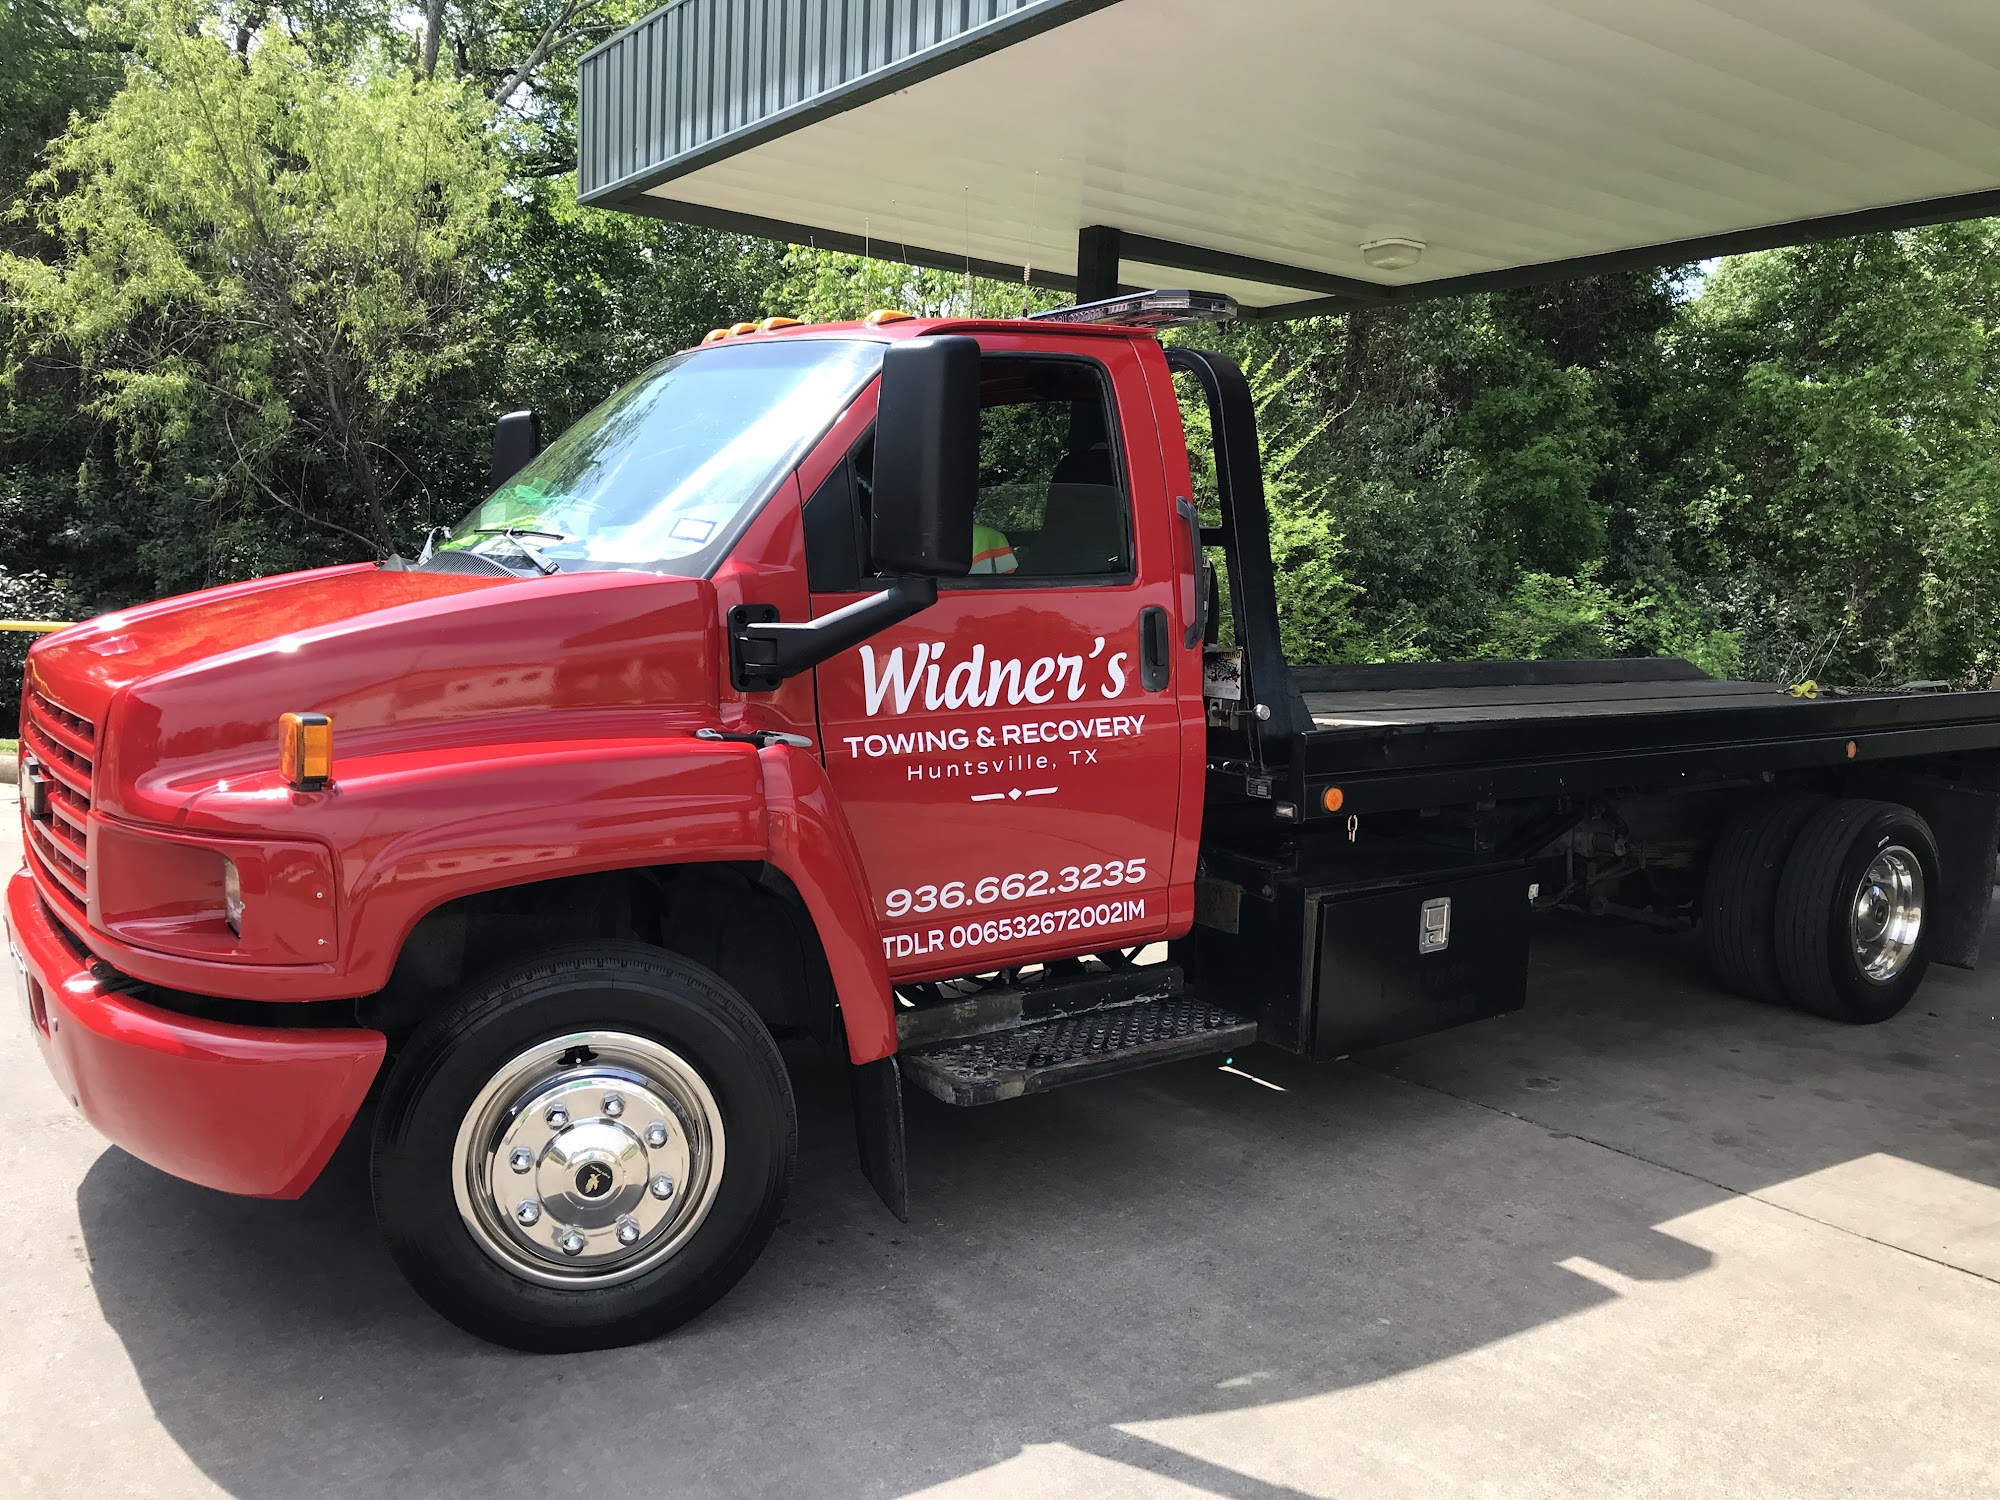 Widner’s Towing & Recovery